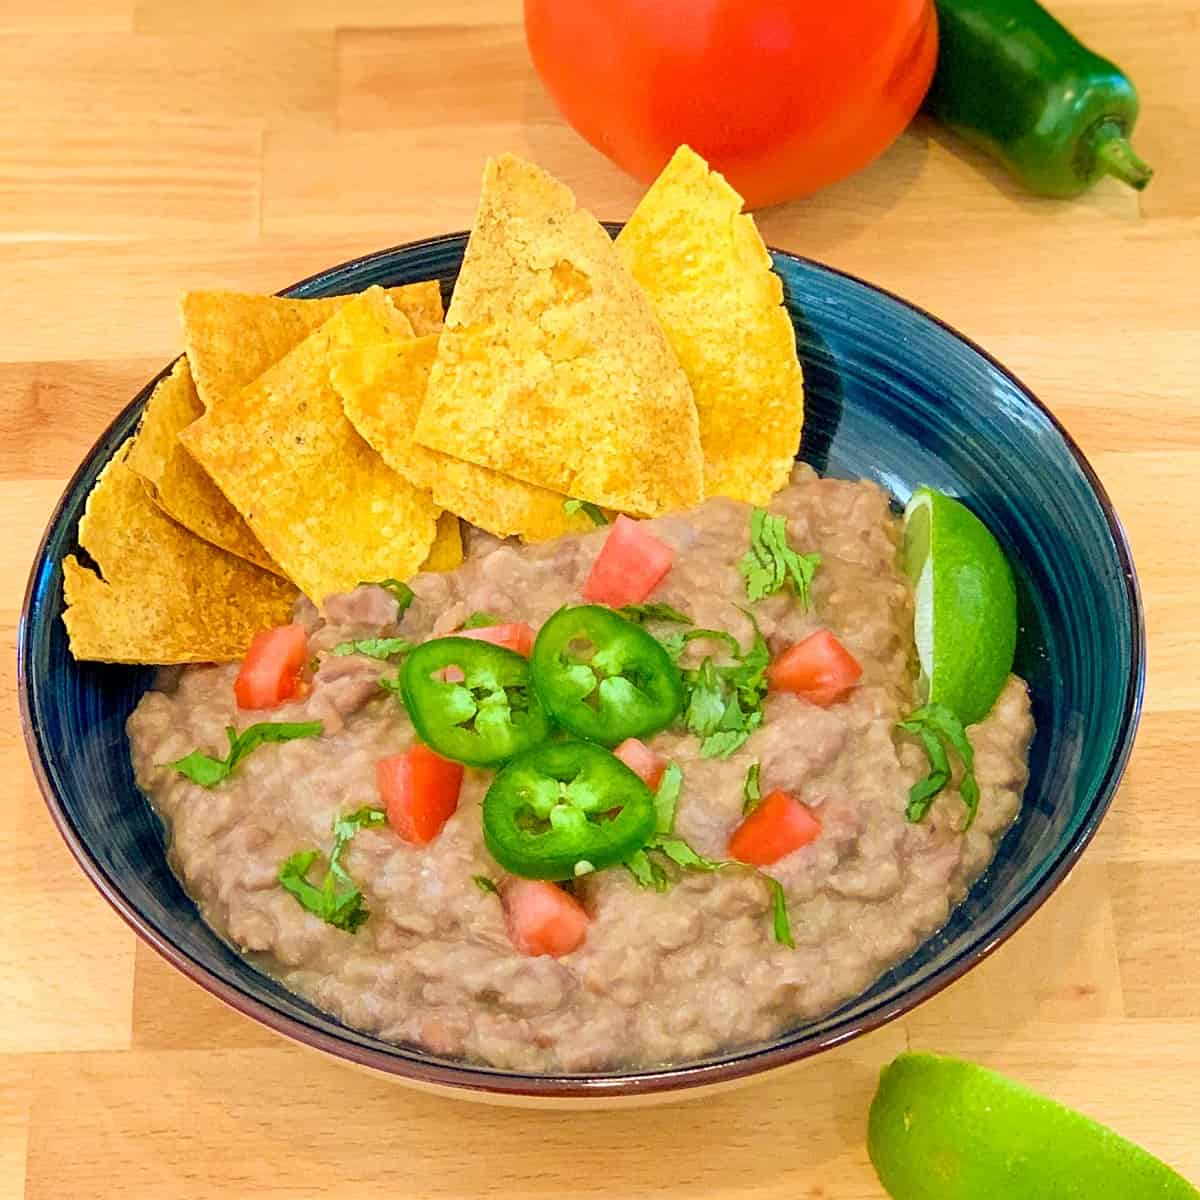 top view of oil free refried beans in a dark blue bowl with oven baked tortilla chips, and chopped tomatoes, cilantro and jalapeno. lime wedges on the side